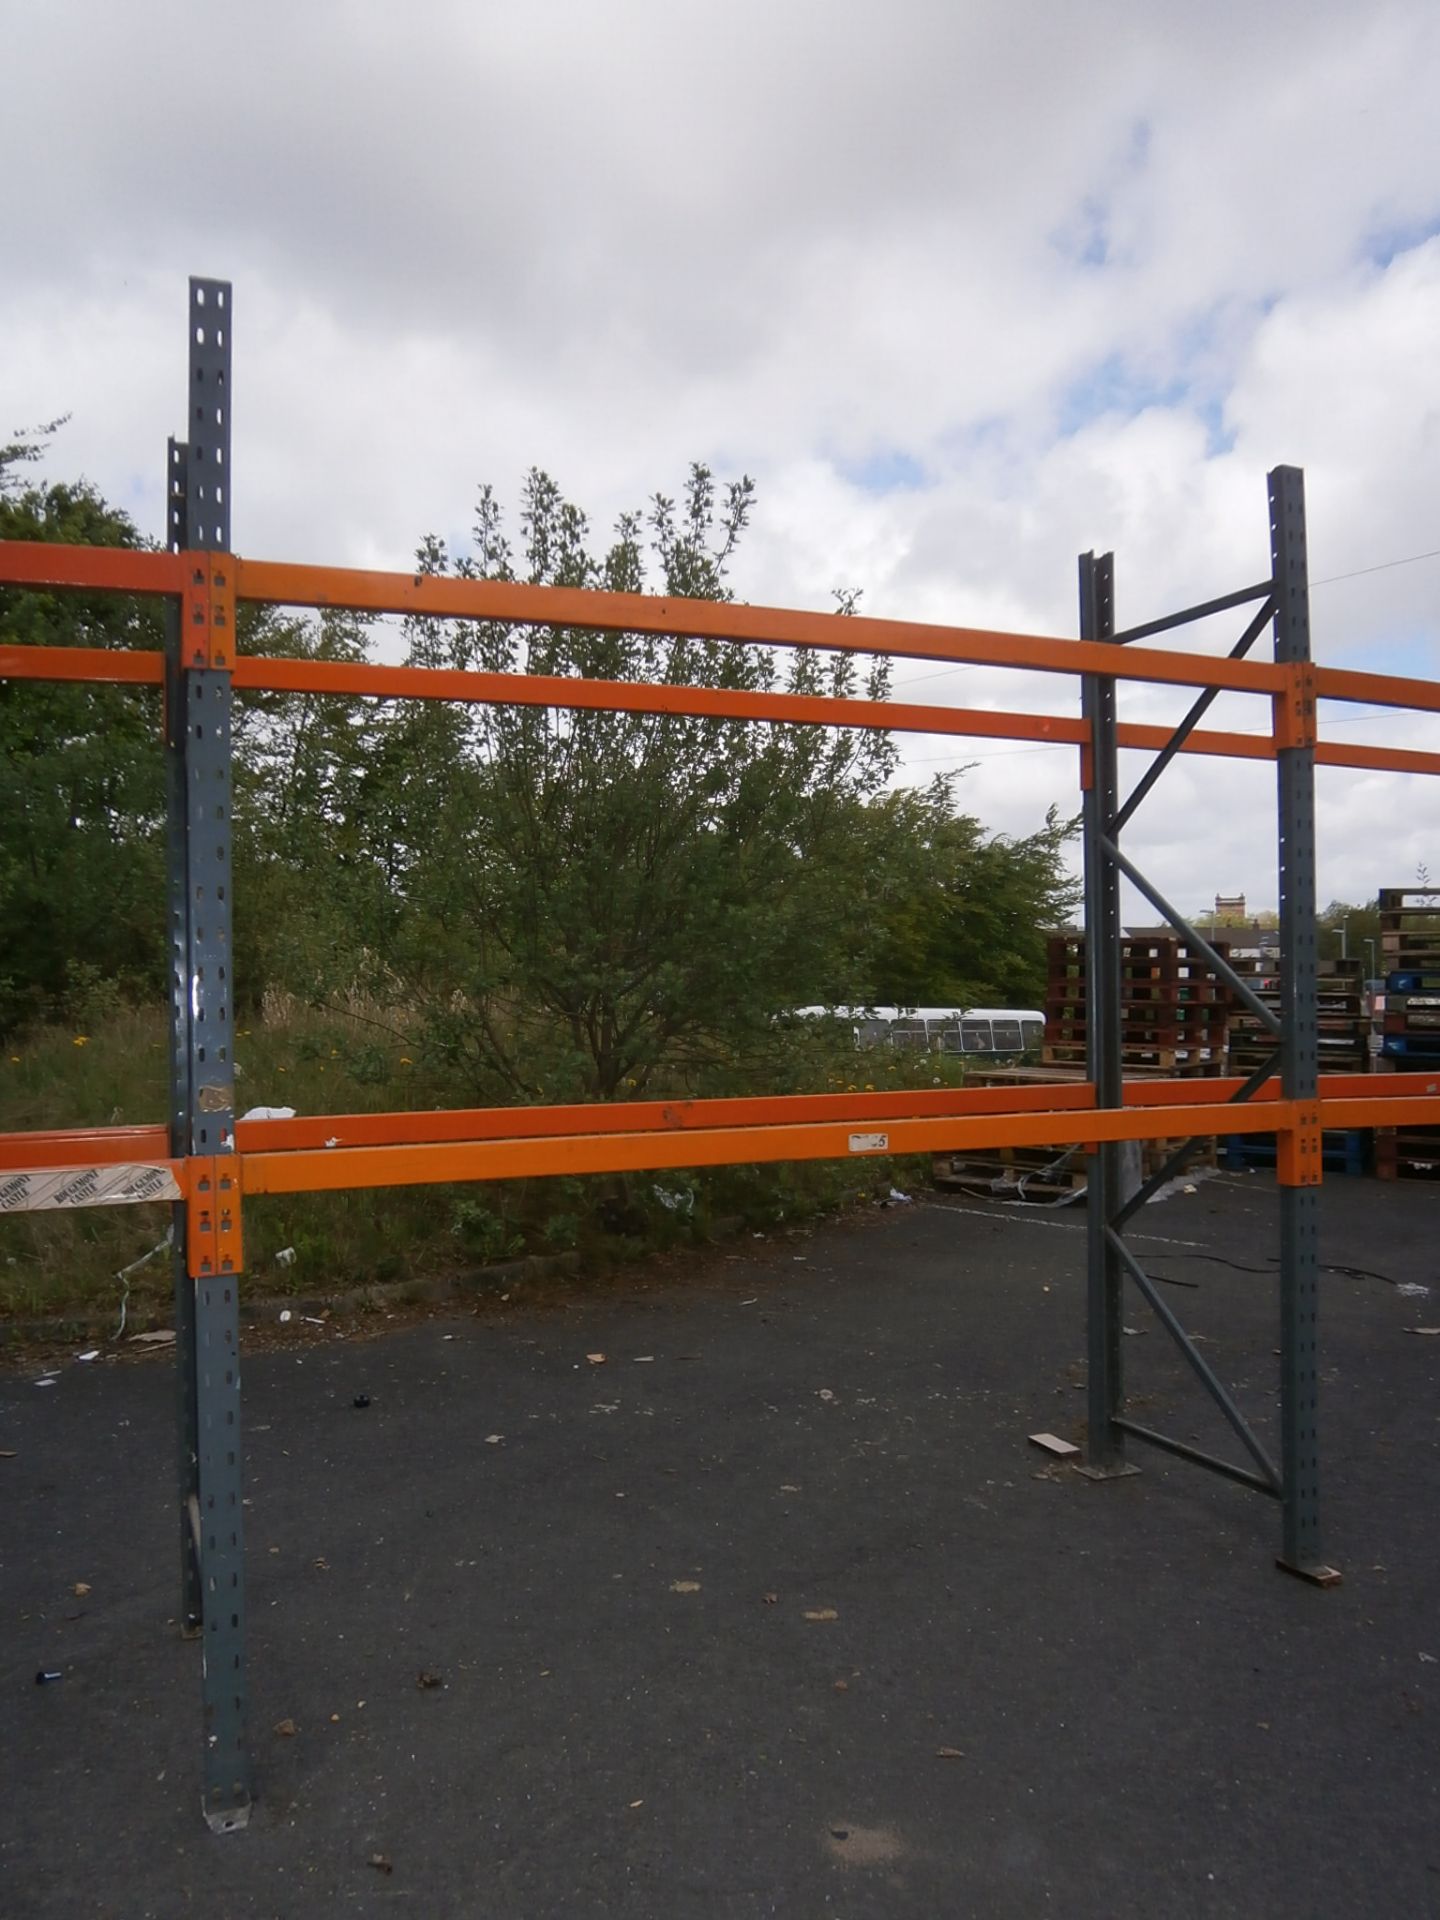 4 x Bays of Commercial Racking - Includes 5 x Uprights, 16 x Beams (Approx Per Bay H - 2900mm, D - 9 - Image 4 of 5